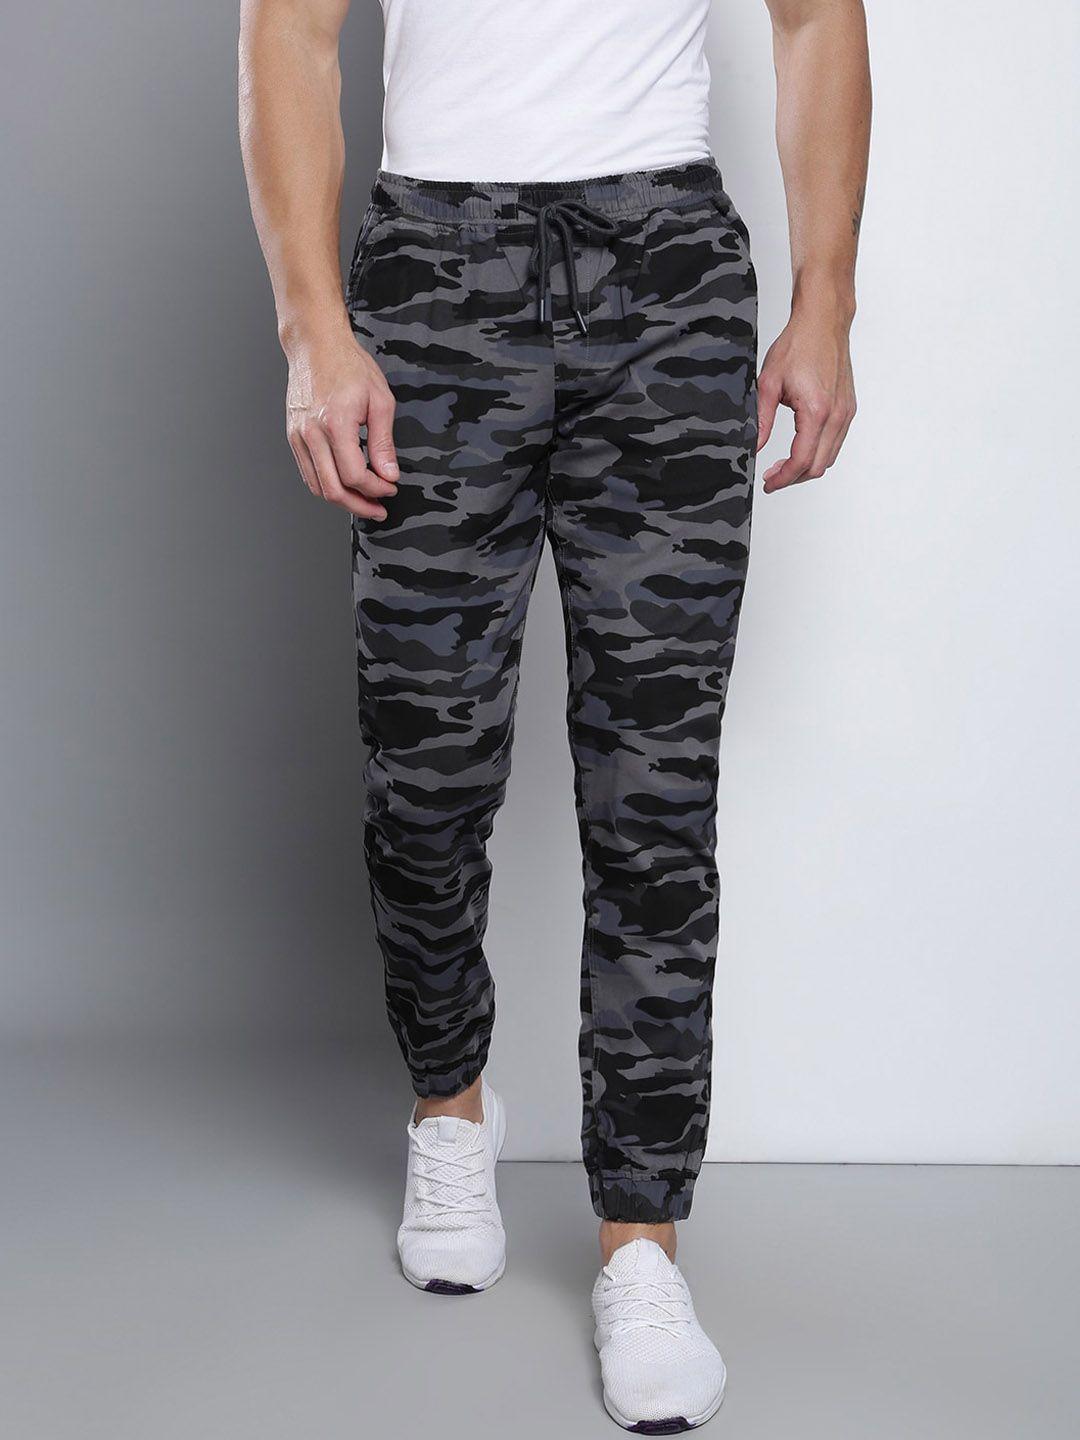 dennis lingo men grey camouflage printed tapered fit joggers trousers